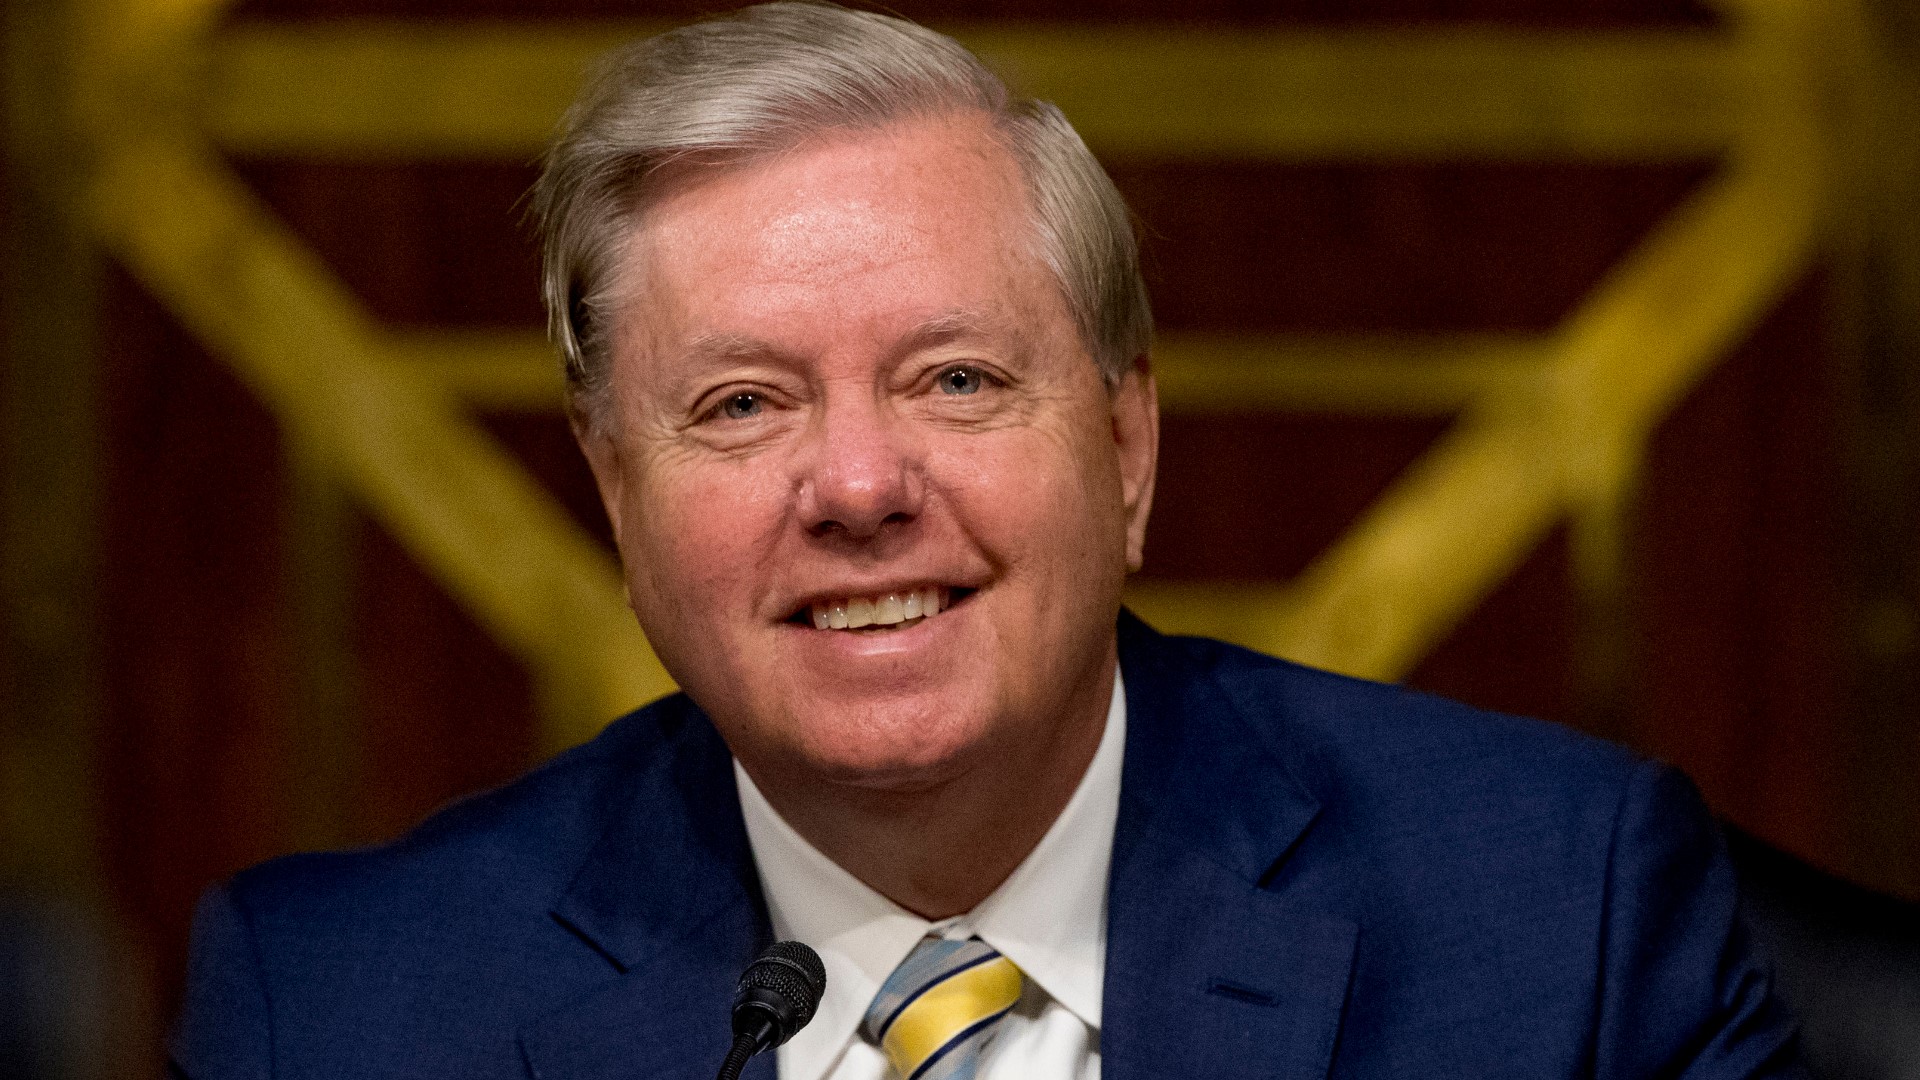 Republican Senator Lindsey Graham is projected to win his reelection race for United States Senate in South Carolina.